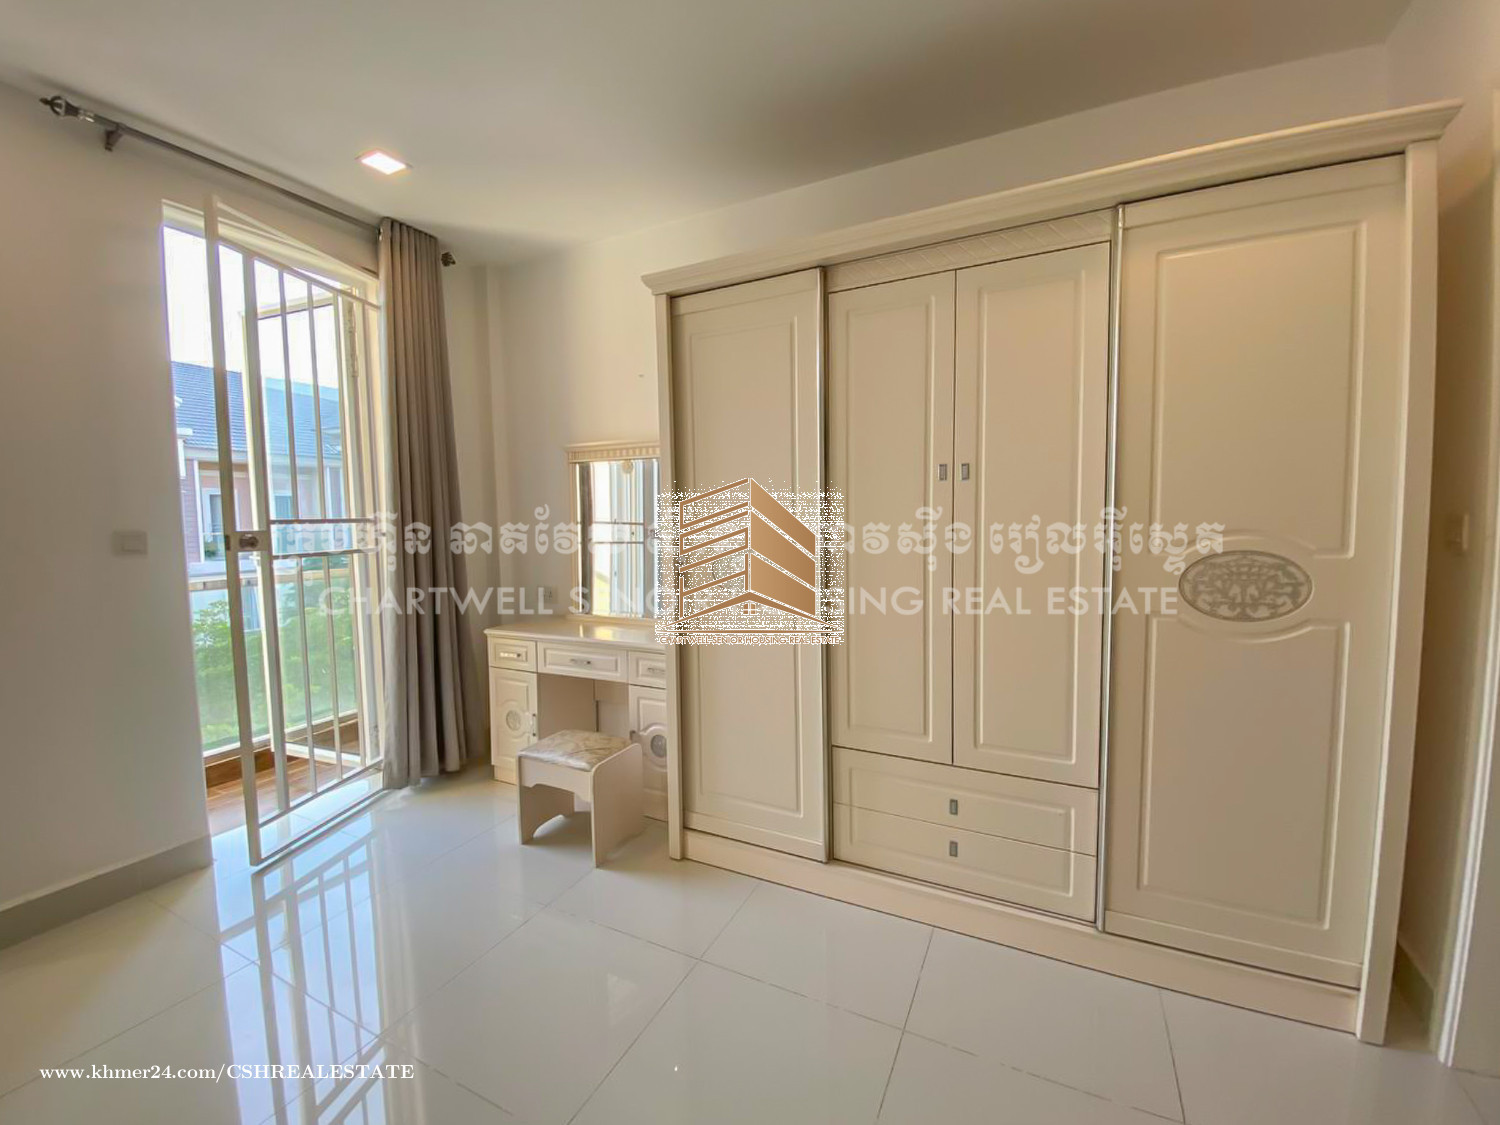 4 Bedrooms Link House for Rent in Borey Chip Mong Sen Sok (near Aeon Mall)